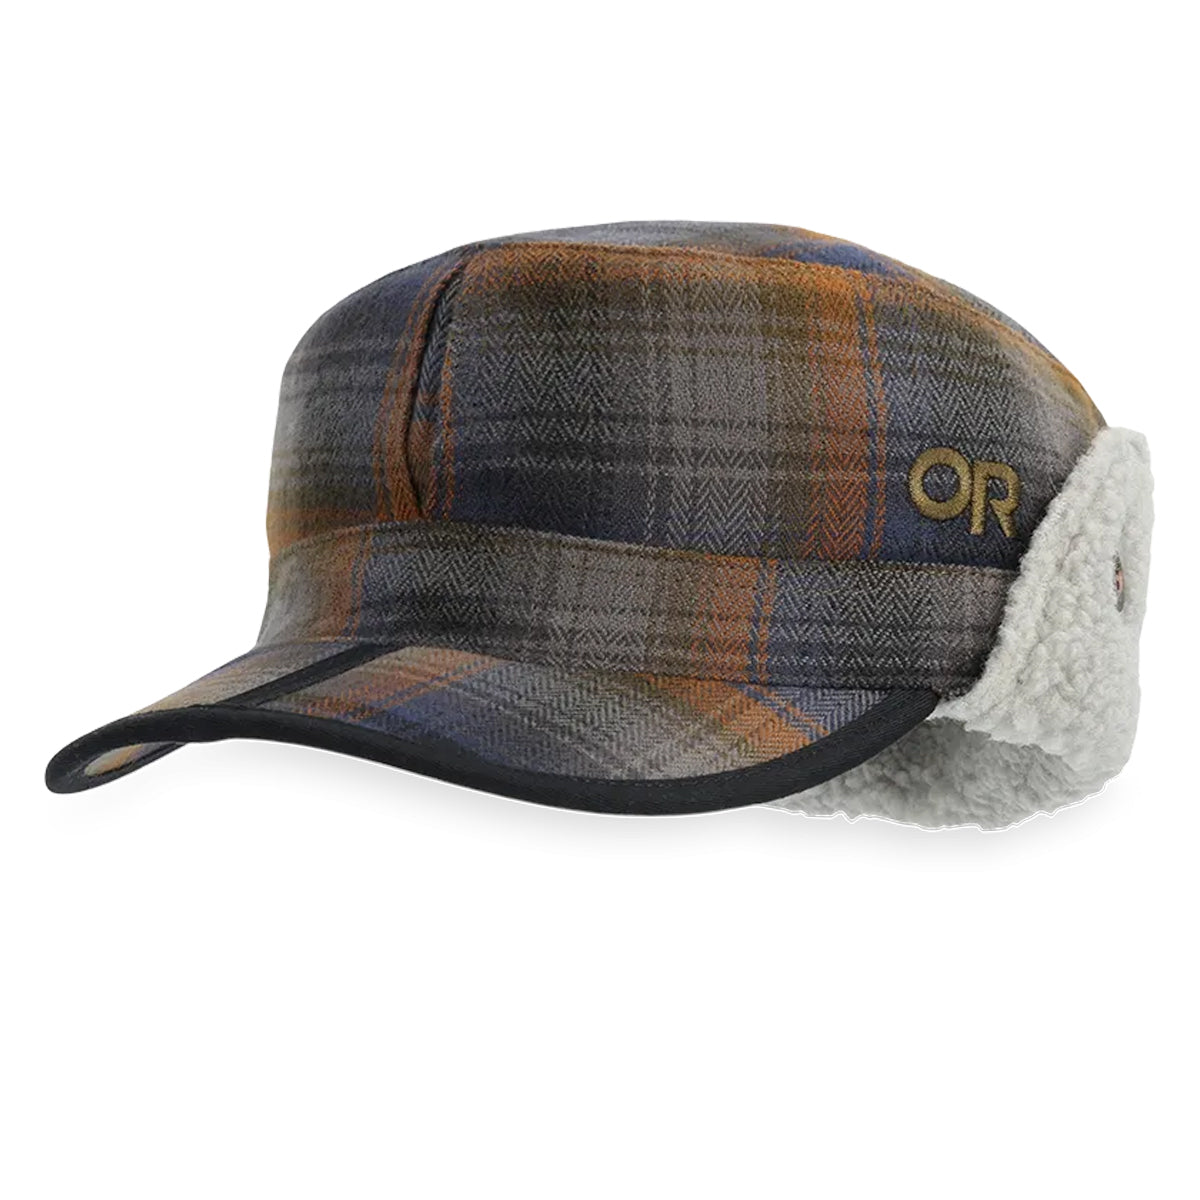 Outdoor Research Yukon Cap in  by GOHUNT | Outdoor Research - GOHUNT Shop